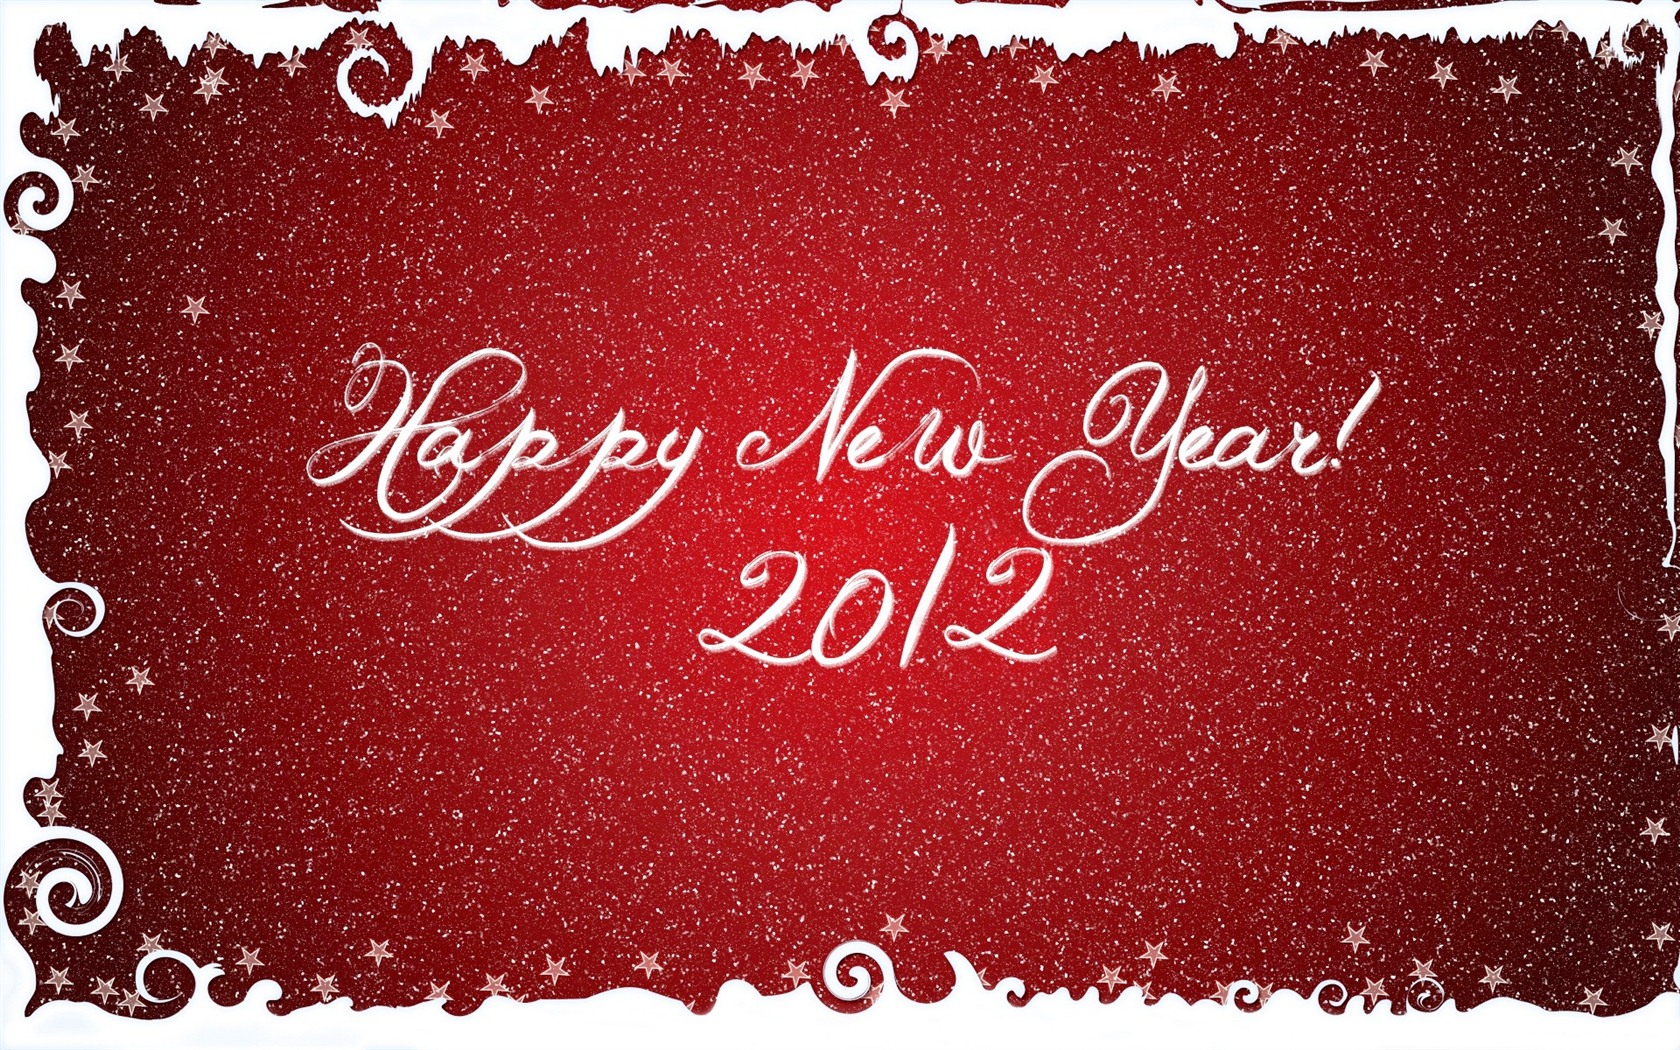 2012 New Year wallpapers (2) #6 - 1680x1050